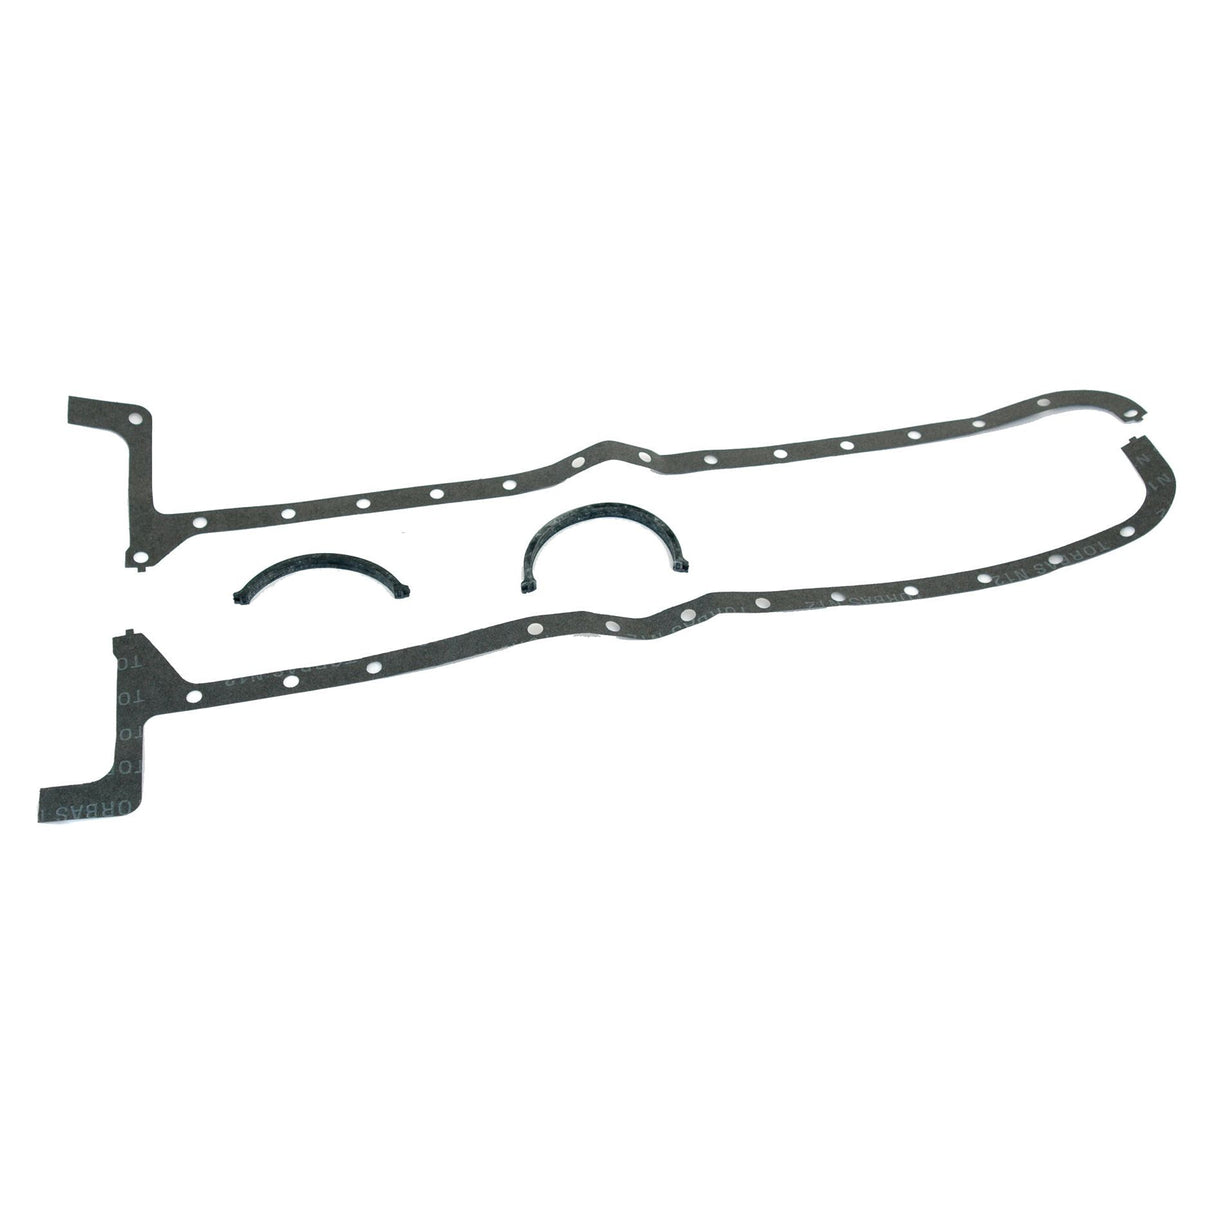 Sump Gasket - 6 Cyl. (8065.01, 8065.02, 8065.05, 8065.06, 8065.04, 8065.05, 8065.06, 8065.02, 8065.05, 8065.05)
 - S.62116 - Massey Tractor Parts